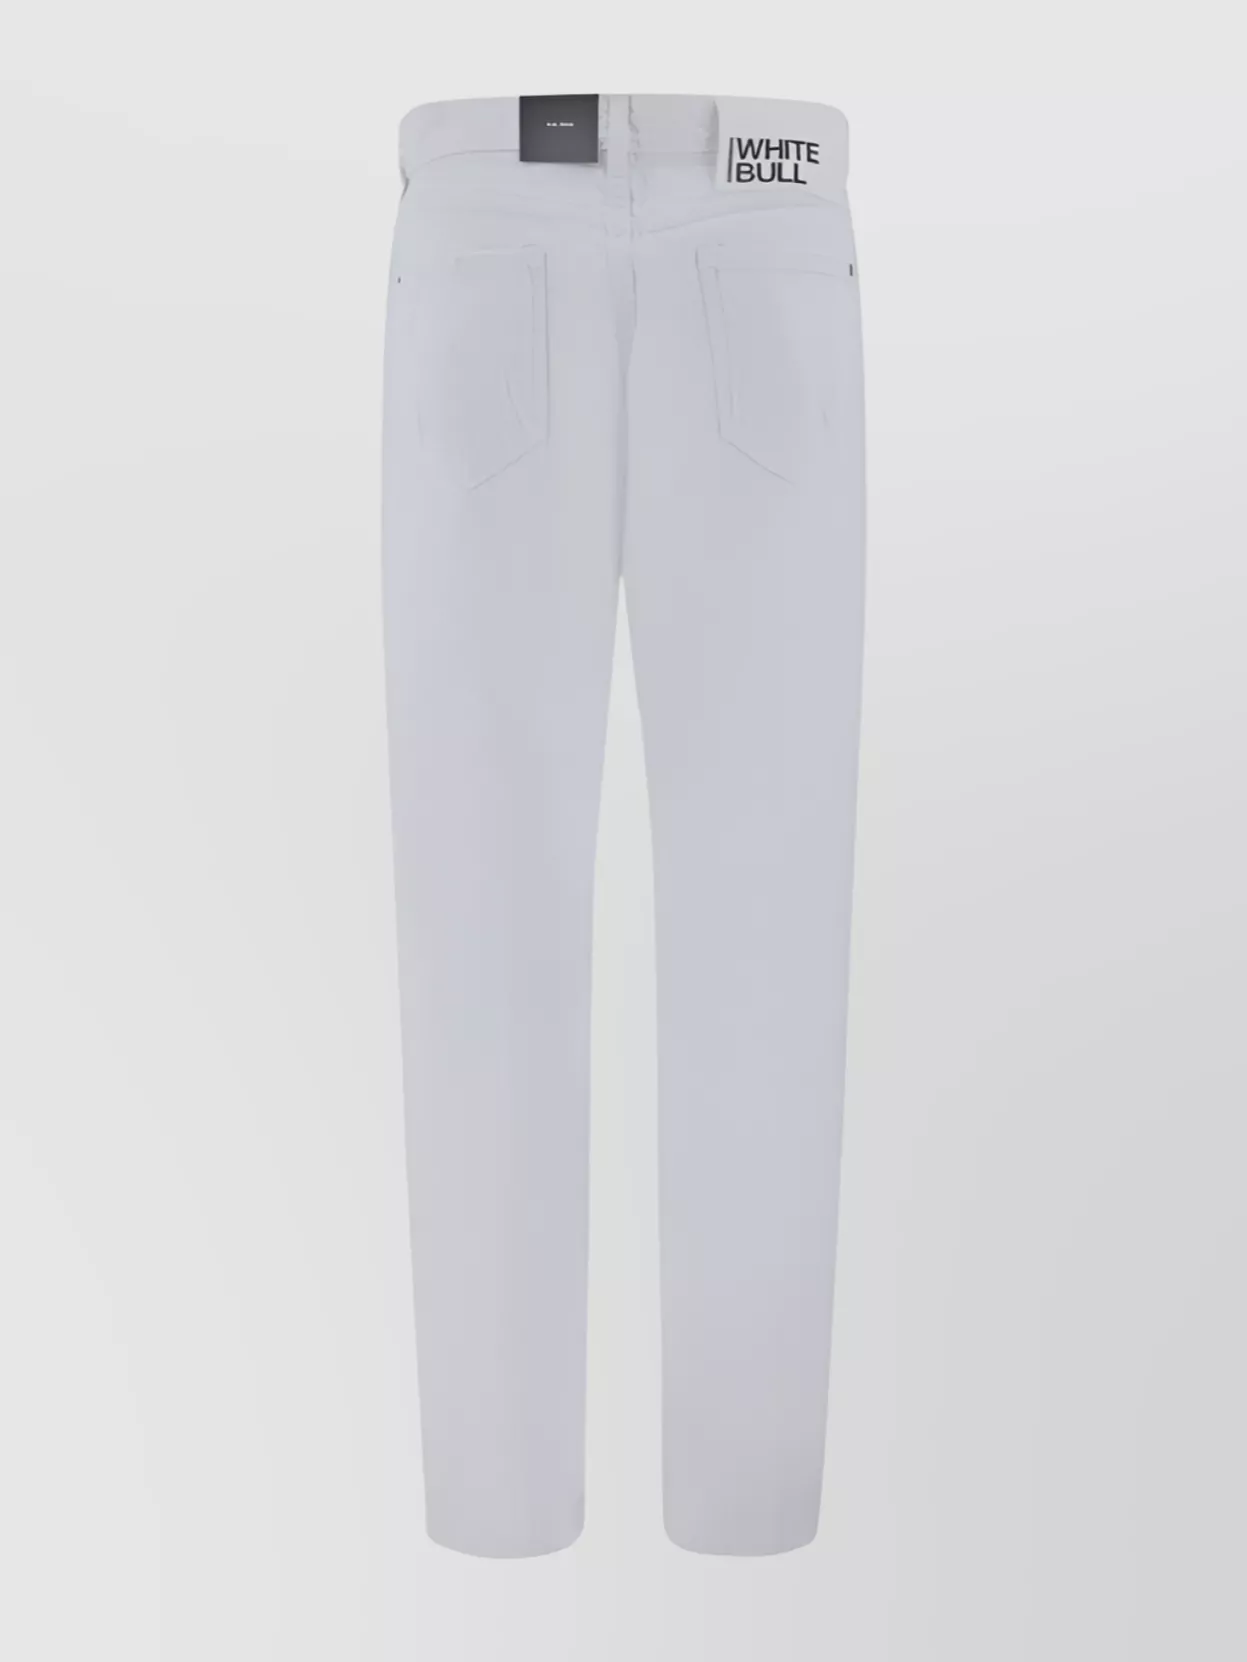 Dsquared2 Straight Cotton Denim Pants With Distressed Design In White